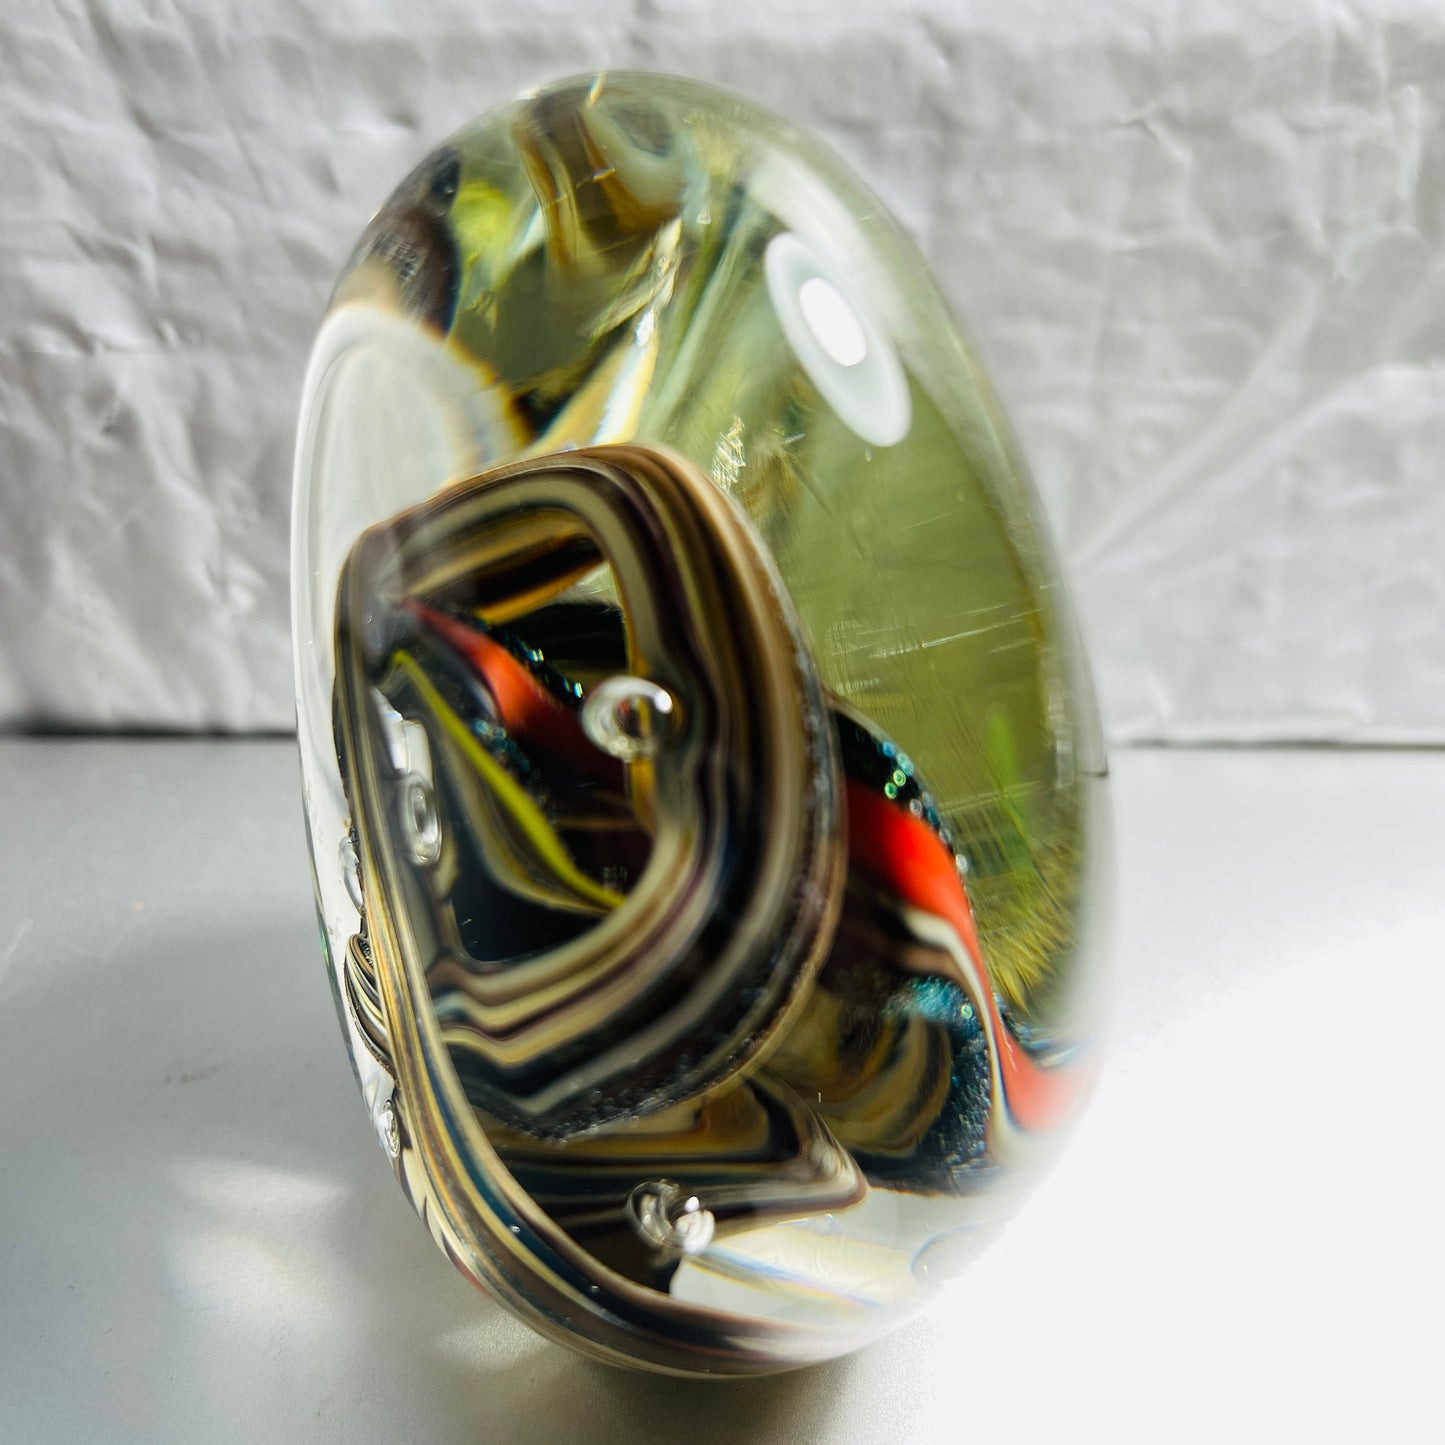 CC Walters, Choice of 2, Signed By Artist, Vintage 1999, Art Glass, Paper Weights, See Variations*